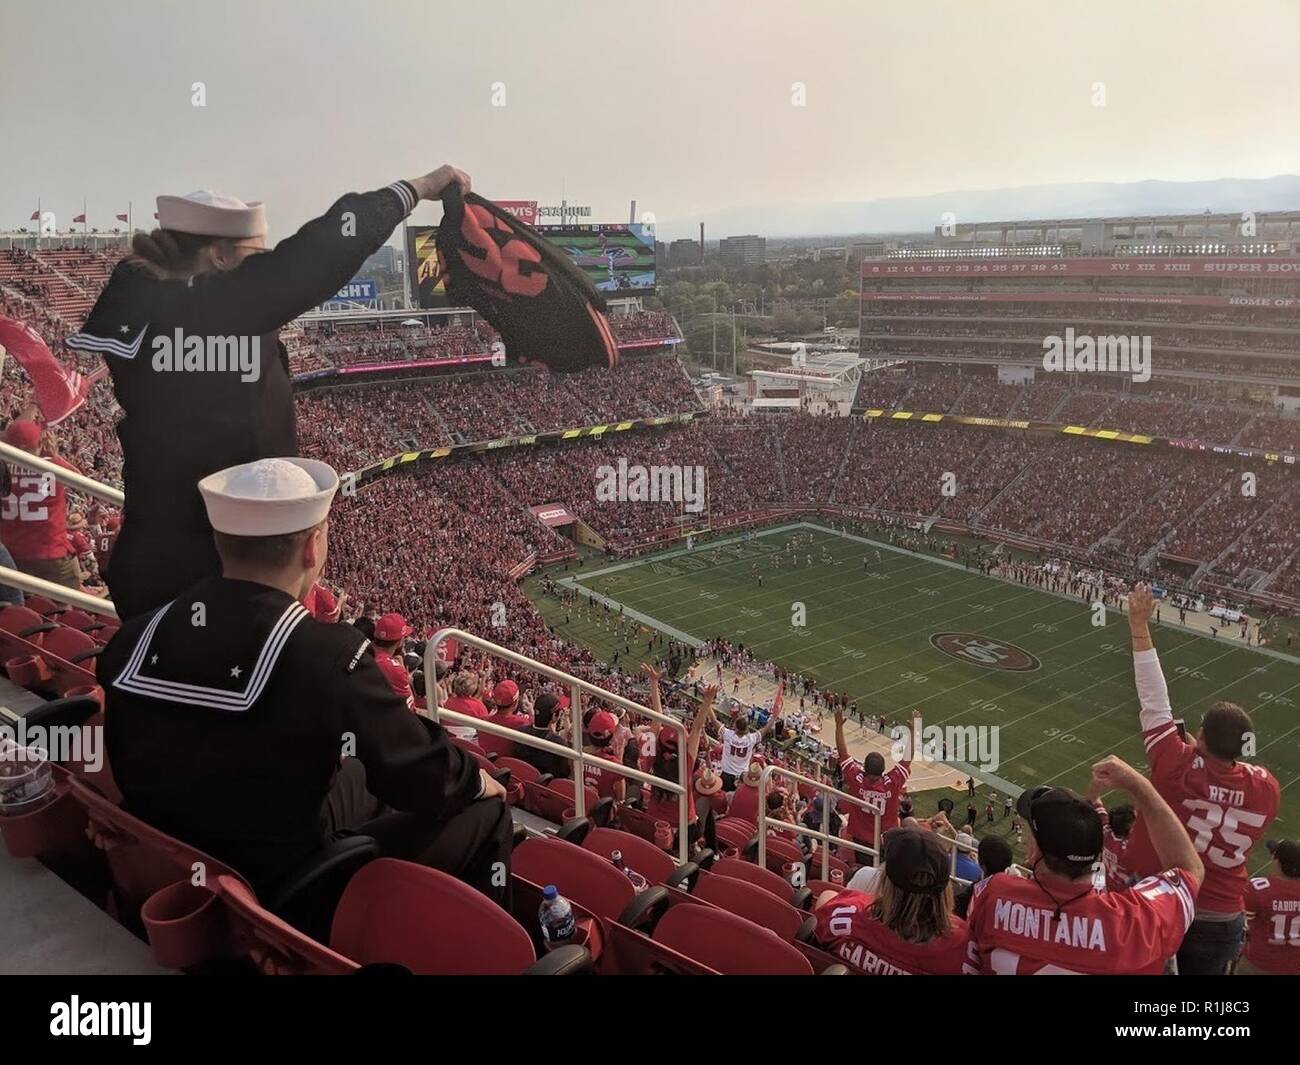 SANTA CLARA, Calif. (Oct. 7, 2018) Aviation Boatswain’s Mate (Handling) 3rd Class Shelby Williams, from Wakefield, Kan., left, and Fireman Jaden Buter, from San Antonio, both assigned to the amphibious assault ship USS Bonhomme Richard (LHD 6), celebrate a touchdown at the San Francisco 49ers-Arizona Cardinals football game as part of a Morale, Welfare, and Recreation trip during San Francisco Fleet Week 2018. San Francisco Fleet Week is an opportunity for the American public to meet their Navy, Marine Corps and Coast Guard teams and experience America’s sea services. During fleet week, servic Stock Photo